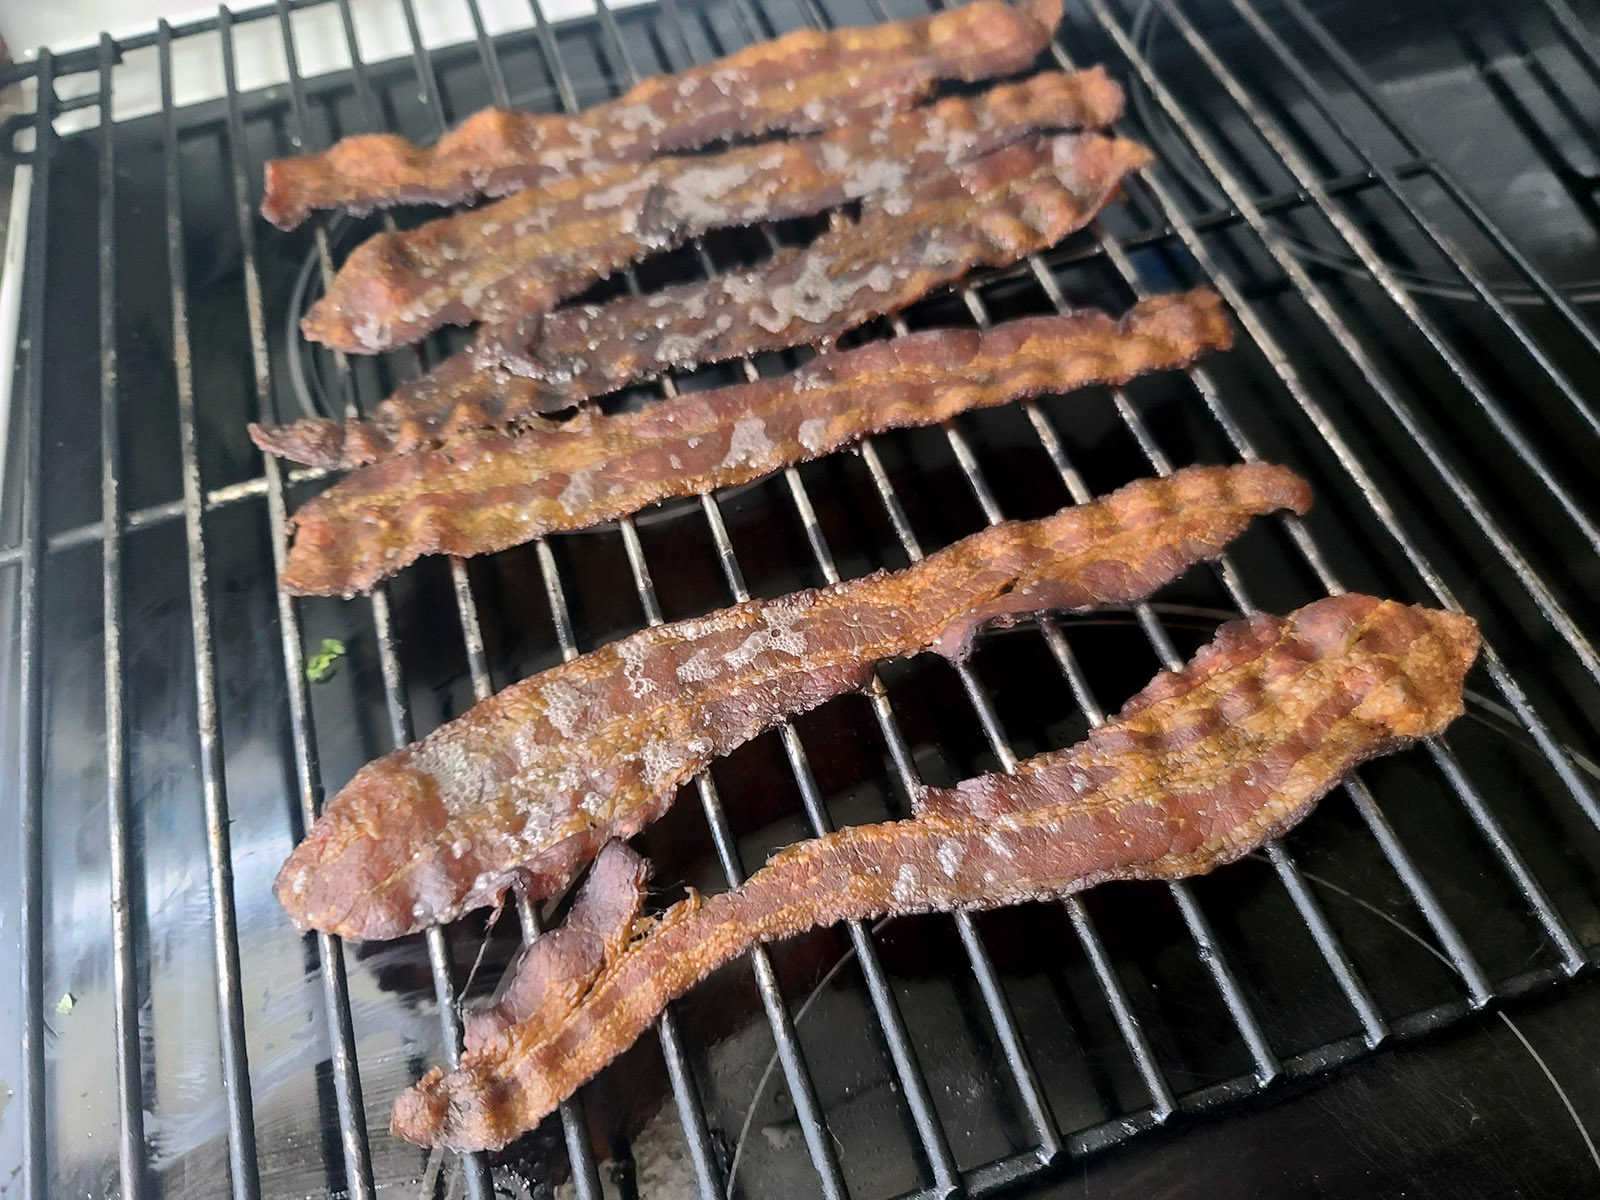 Bacon slices smoking in a large smoker.